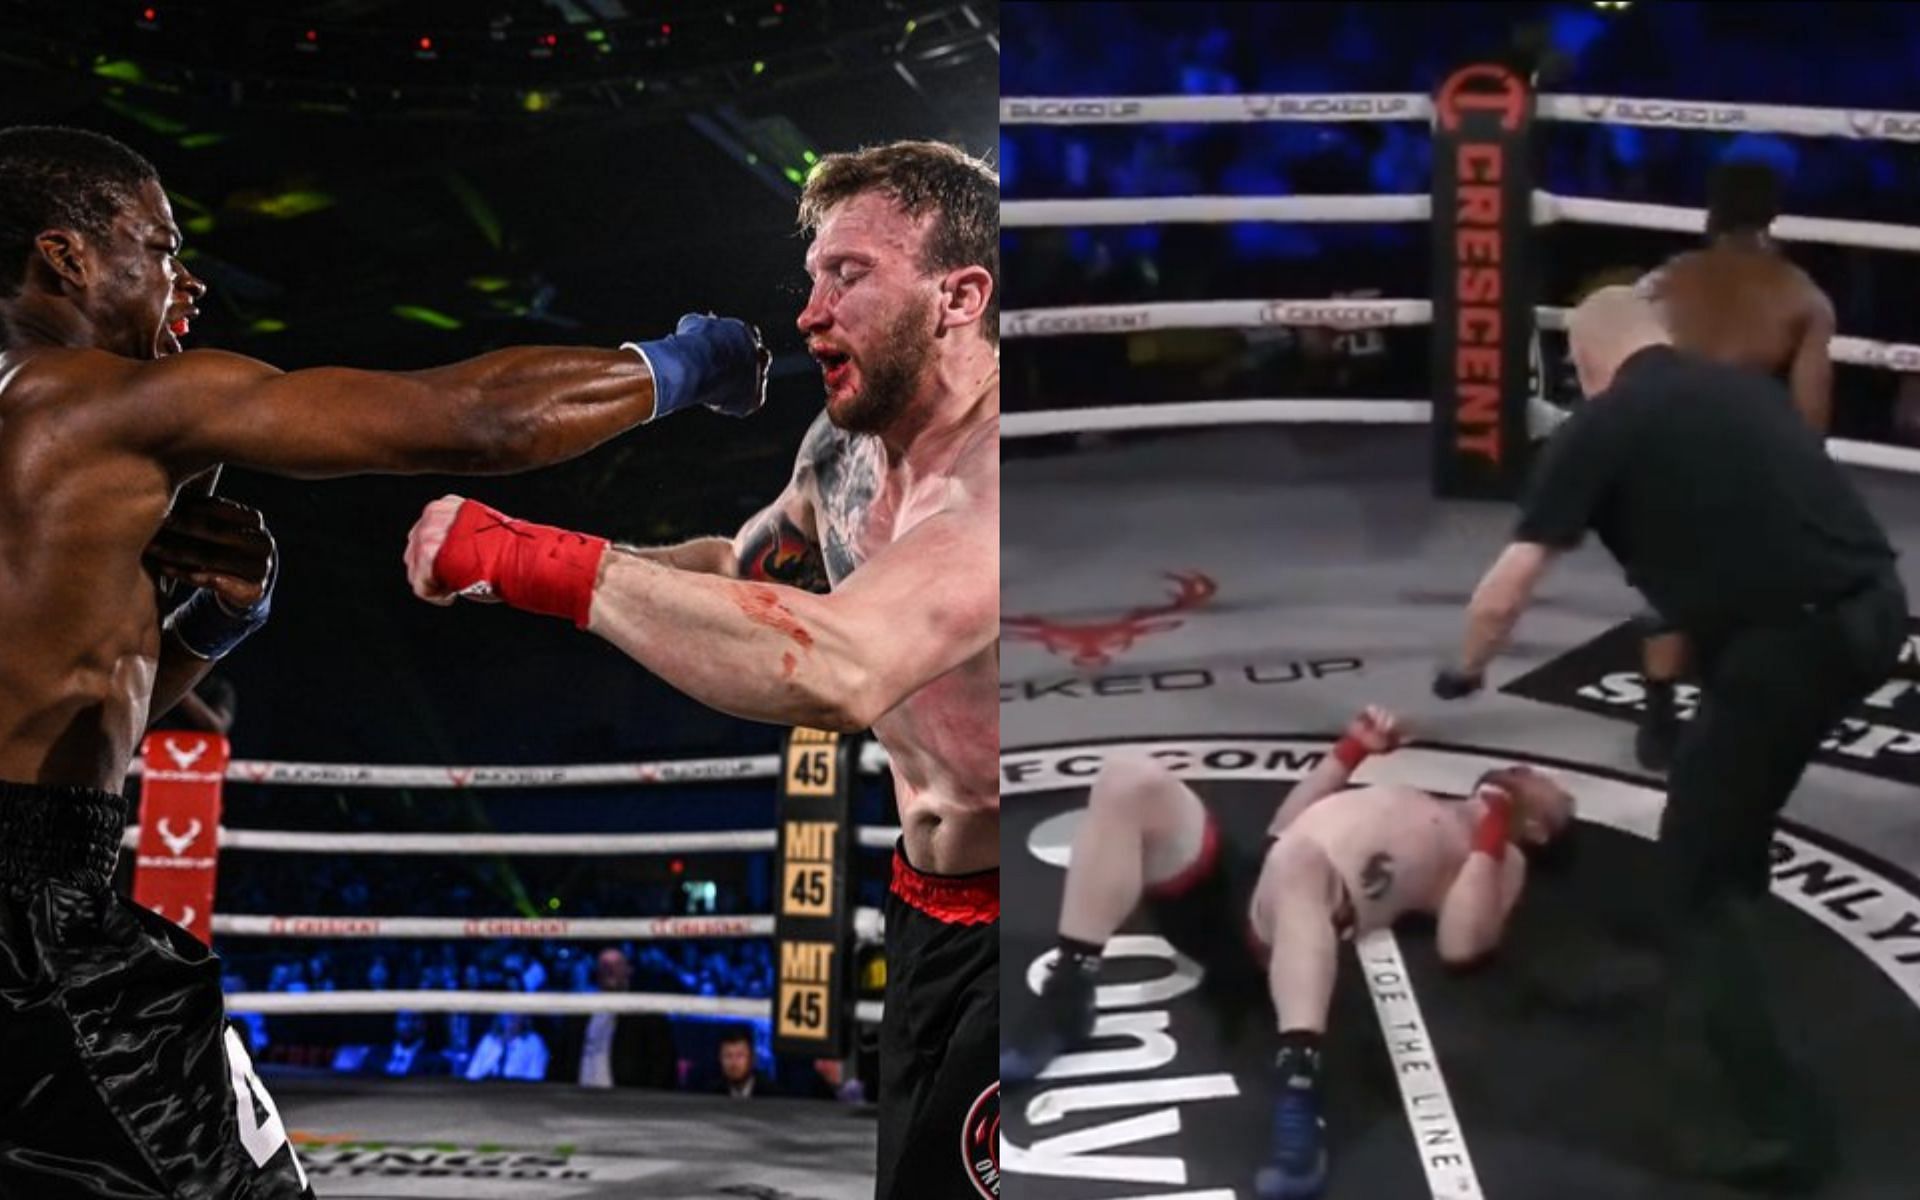 Dorian Long punching Mark Johnson (left) and Dorain Long with an offensive celebration (right) (Image credits @CombatPress and @JohnMorgan_MMA on Twitter)